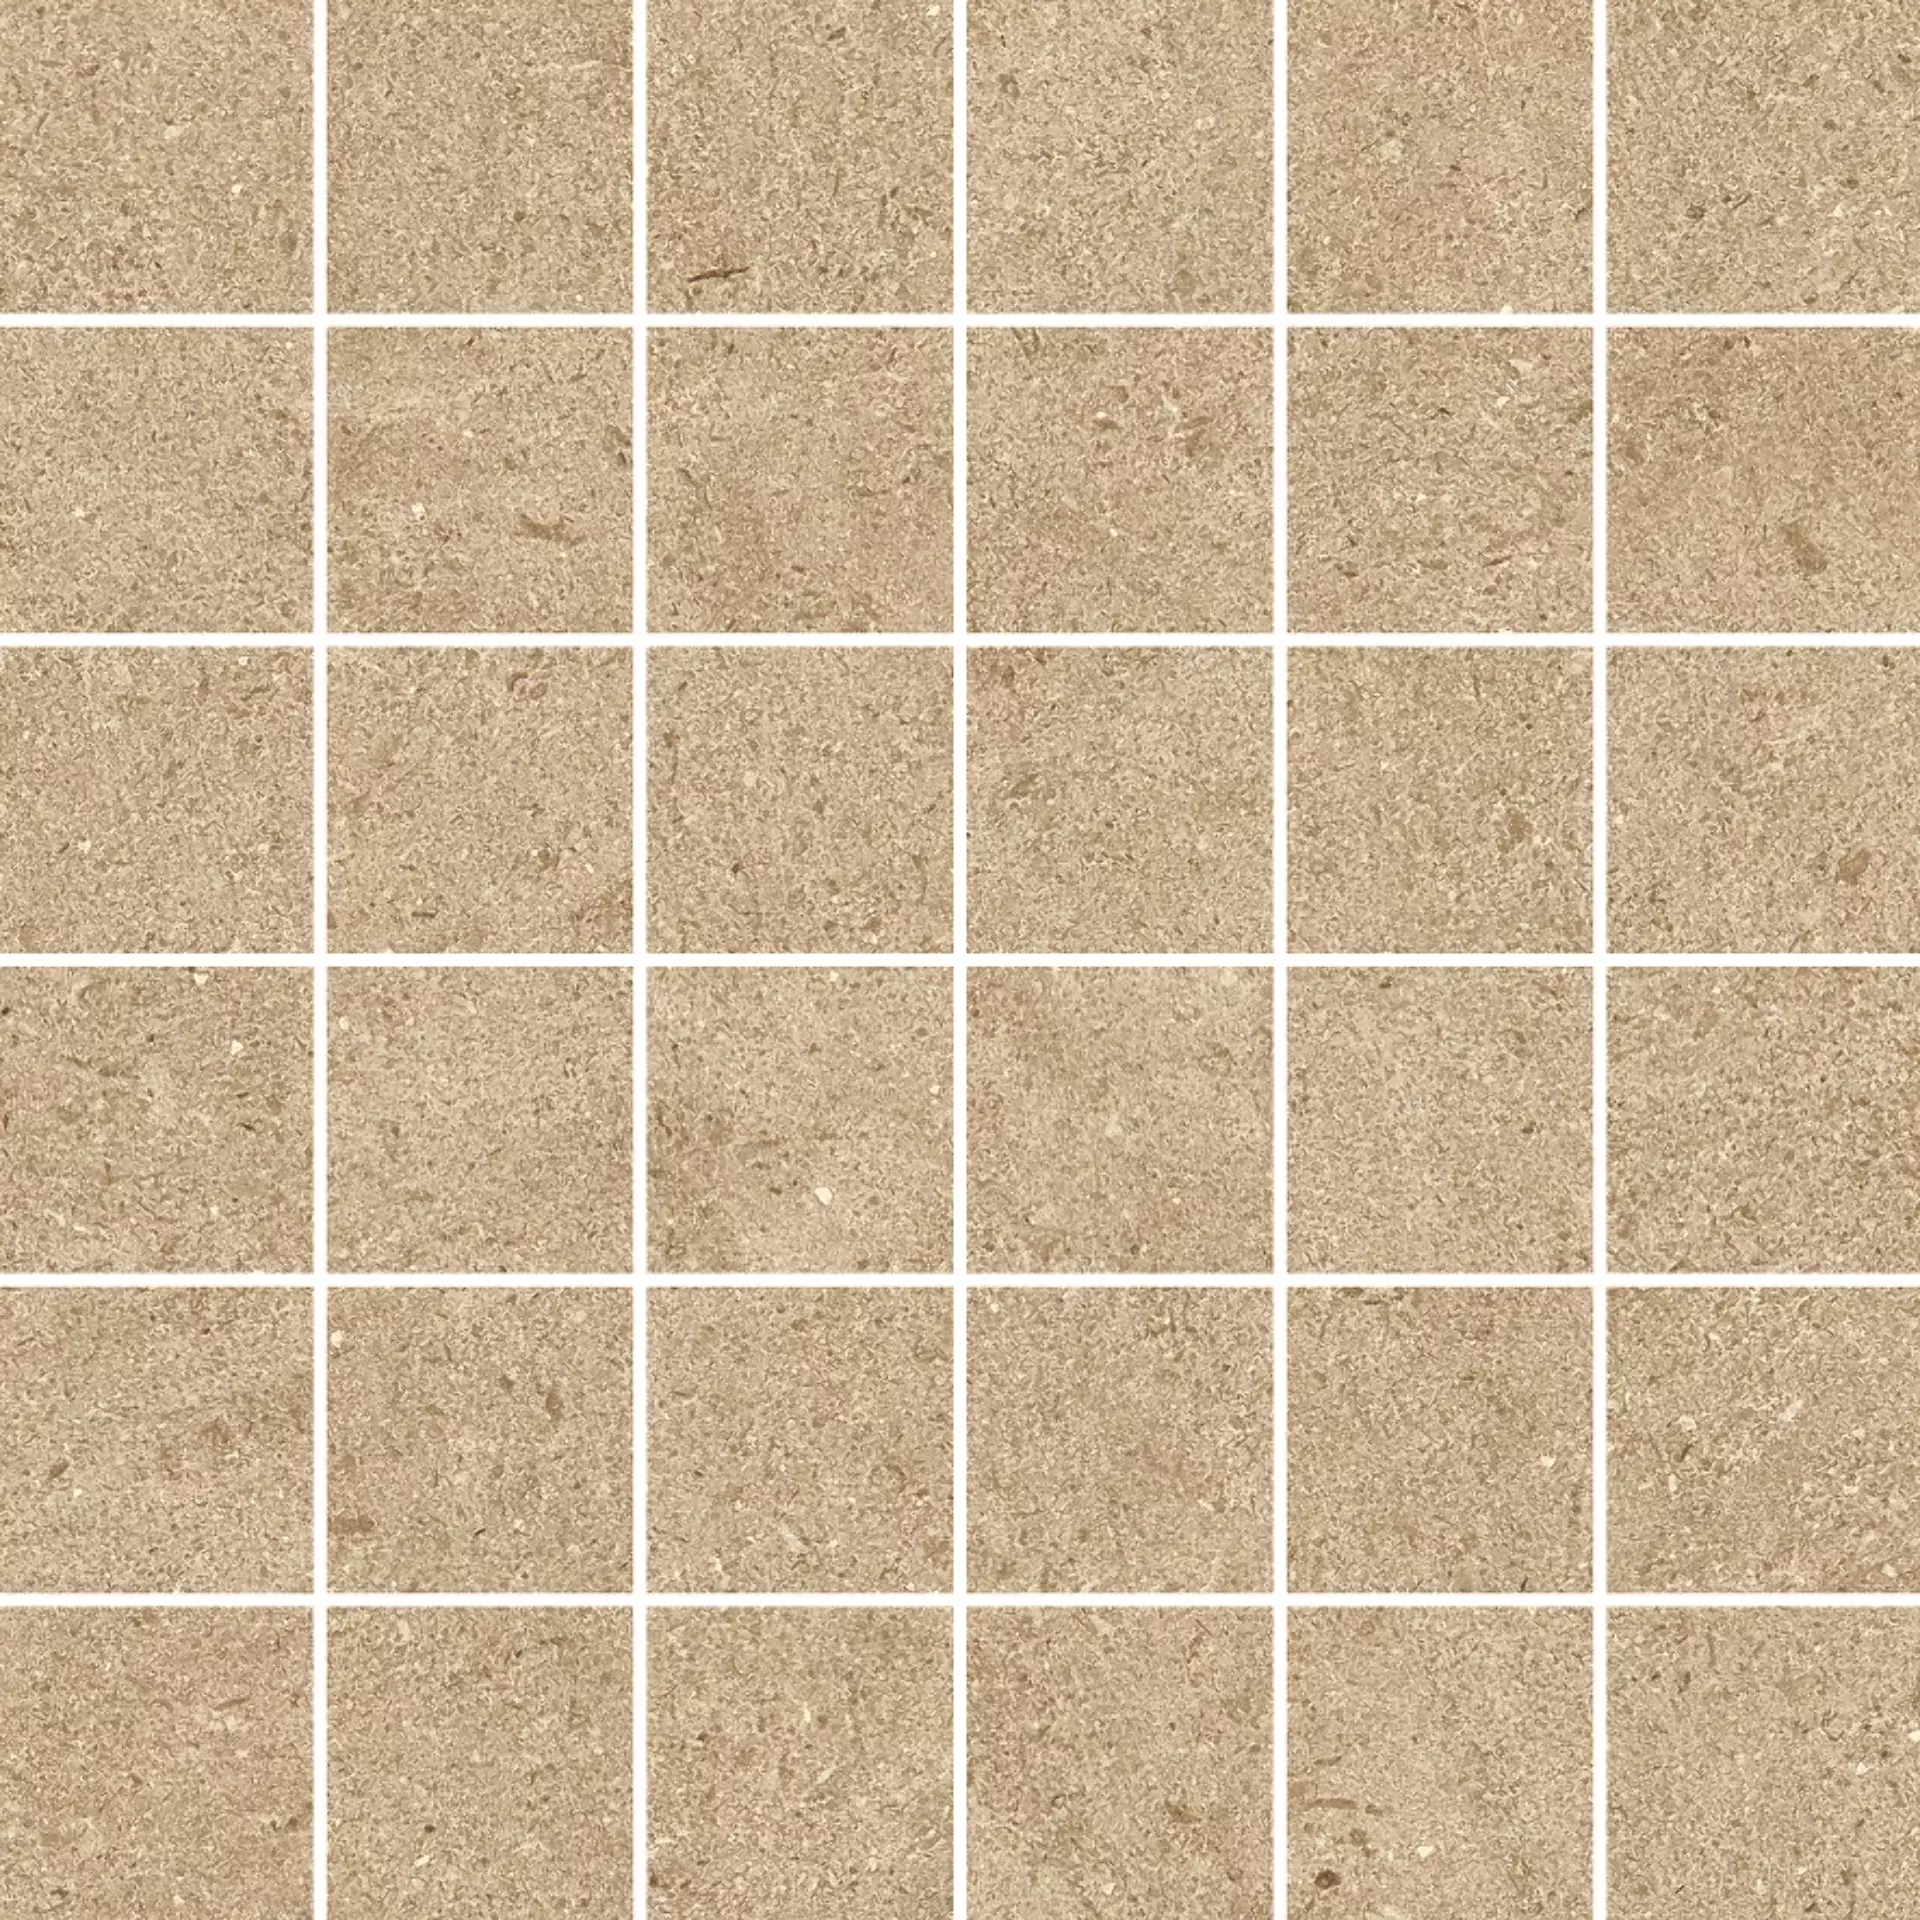 Margres Hybrid Beige Touch Mosaic 5x5 B25M33HB2T 30x30cm rectified 10,5mm